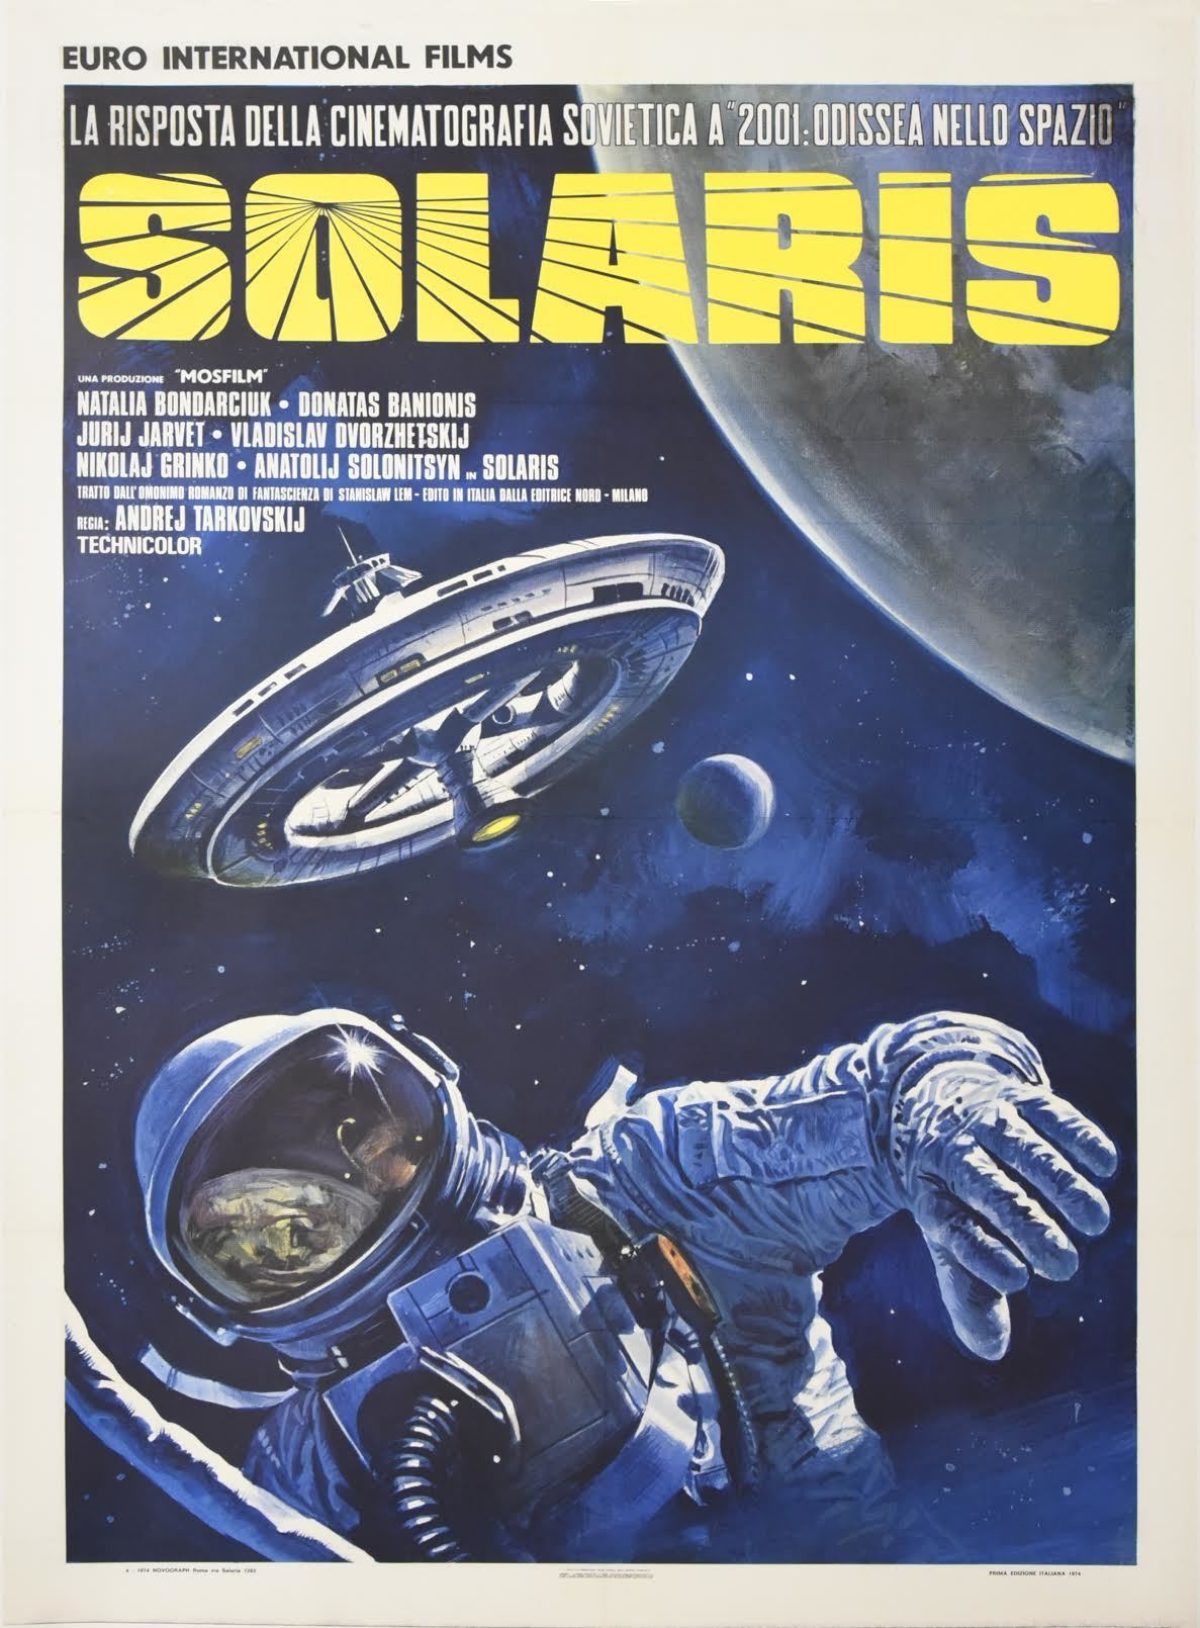 A movie poster of an astronaut floating in space with a spacecraft and a planet behind them.